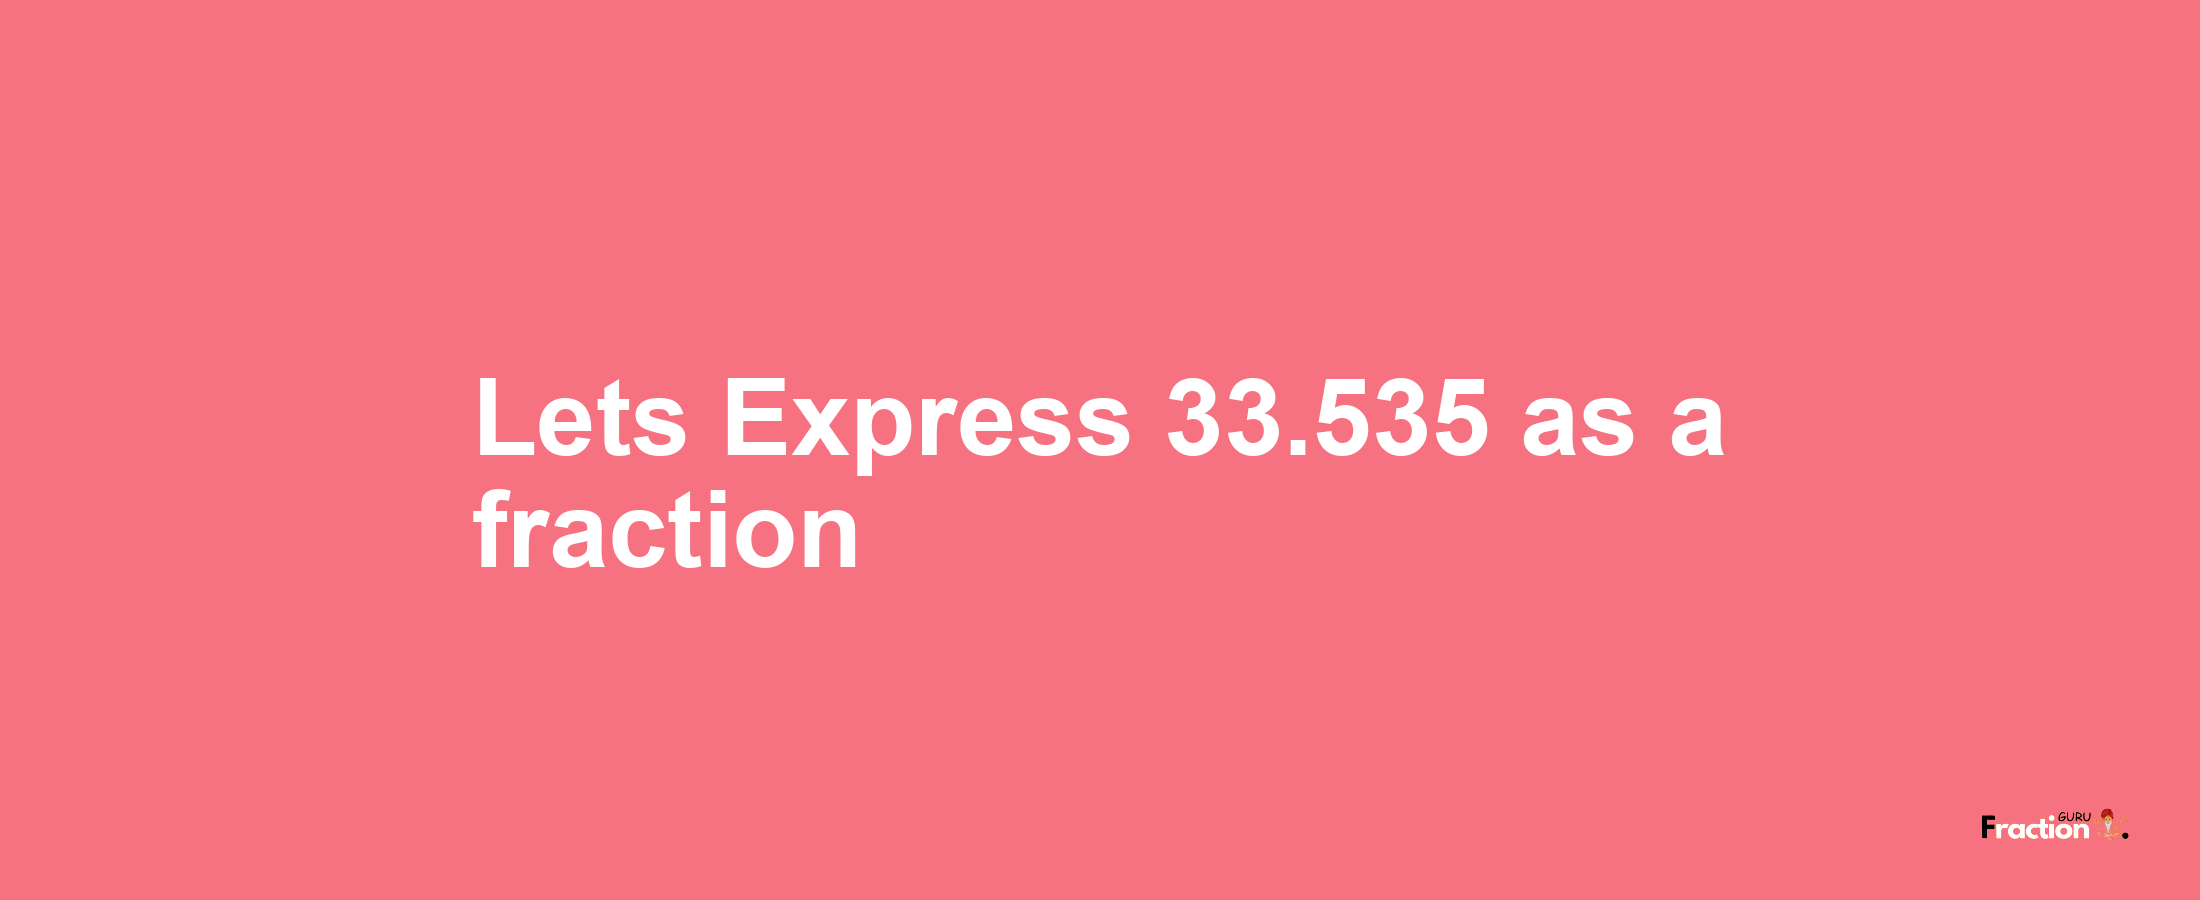 Lets Express 33.535 as afraction